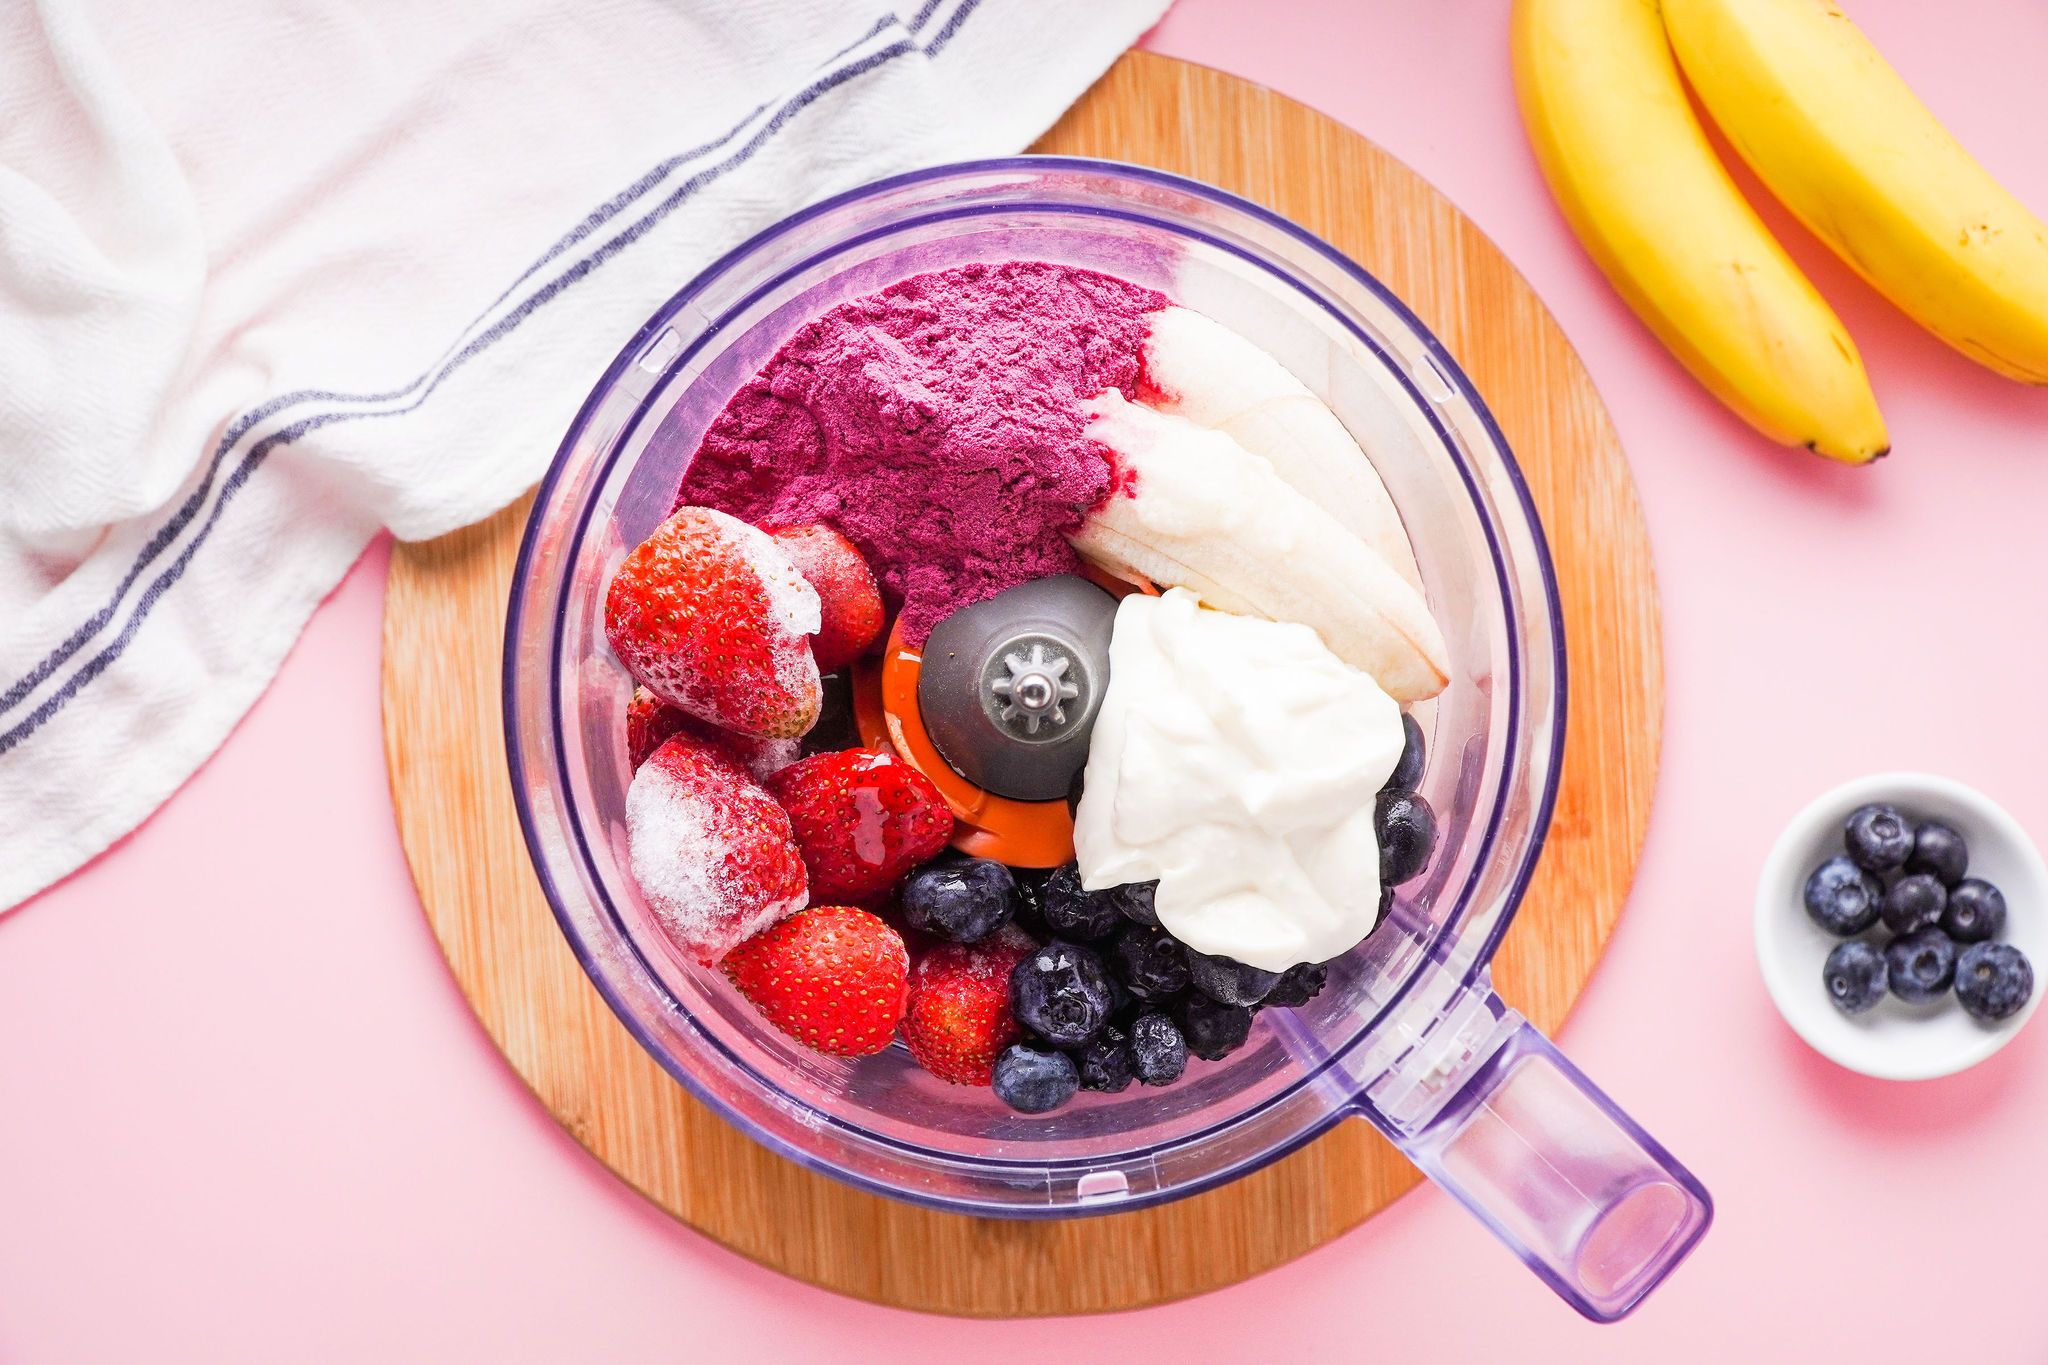 How To Make An Acai Bowl // overhead shot of acai bowl ingredients in blender